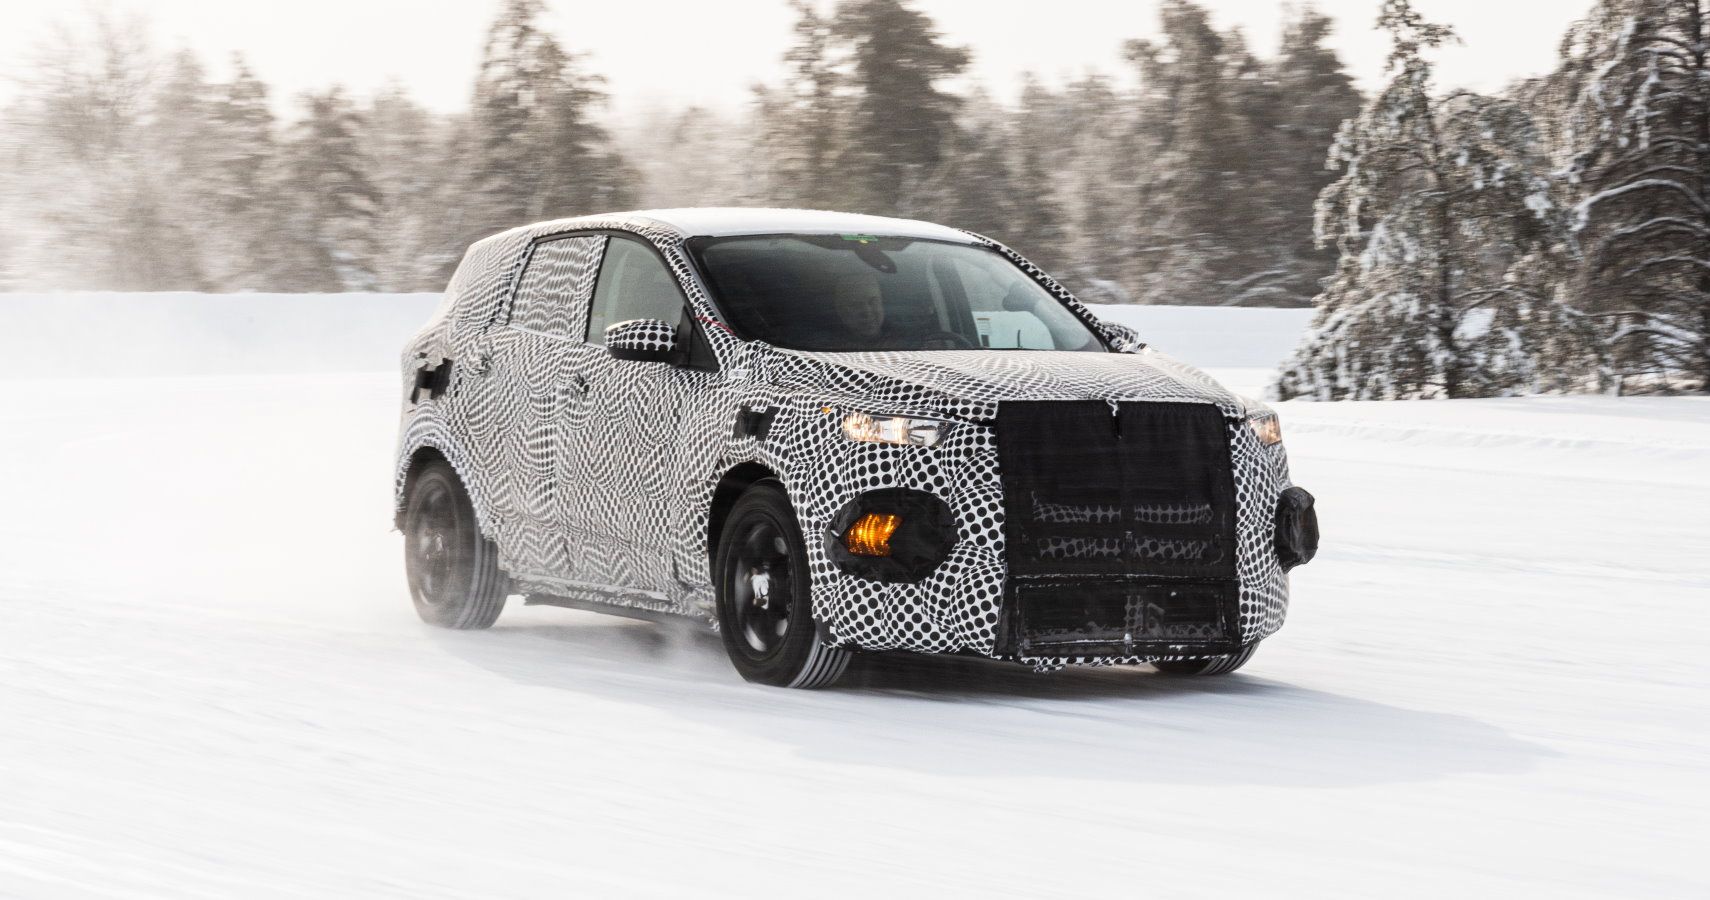 A prototype Ford electric vehicle testing in frigid, snowy conditions.